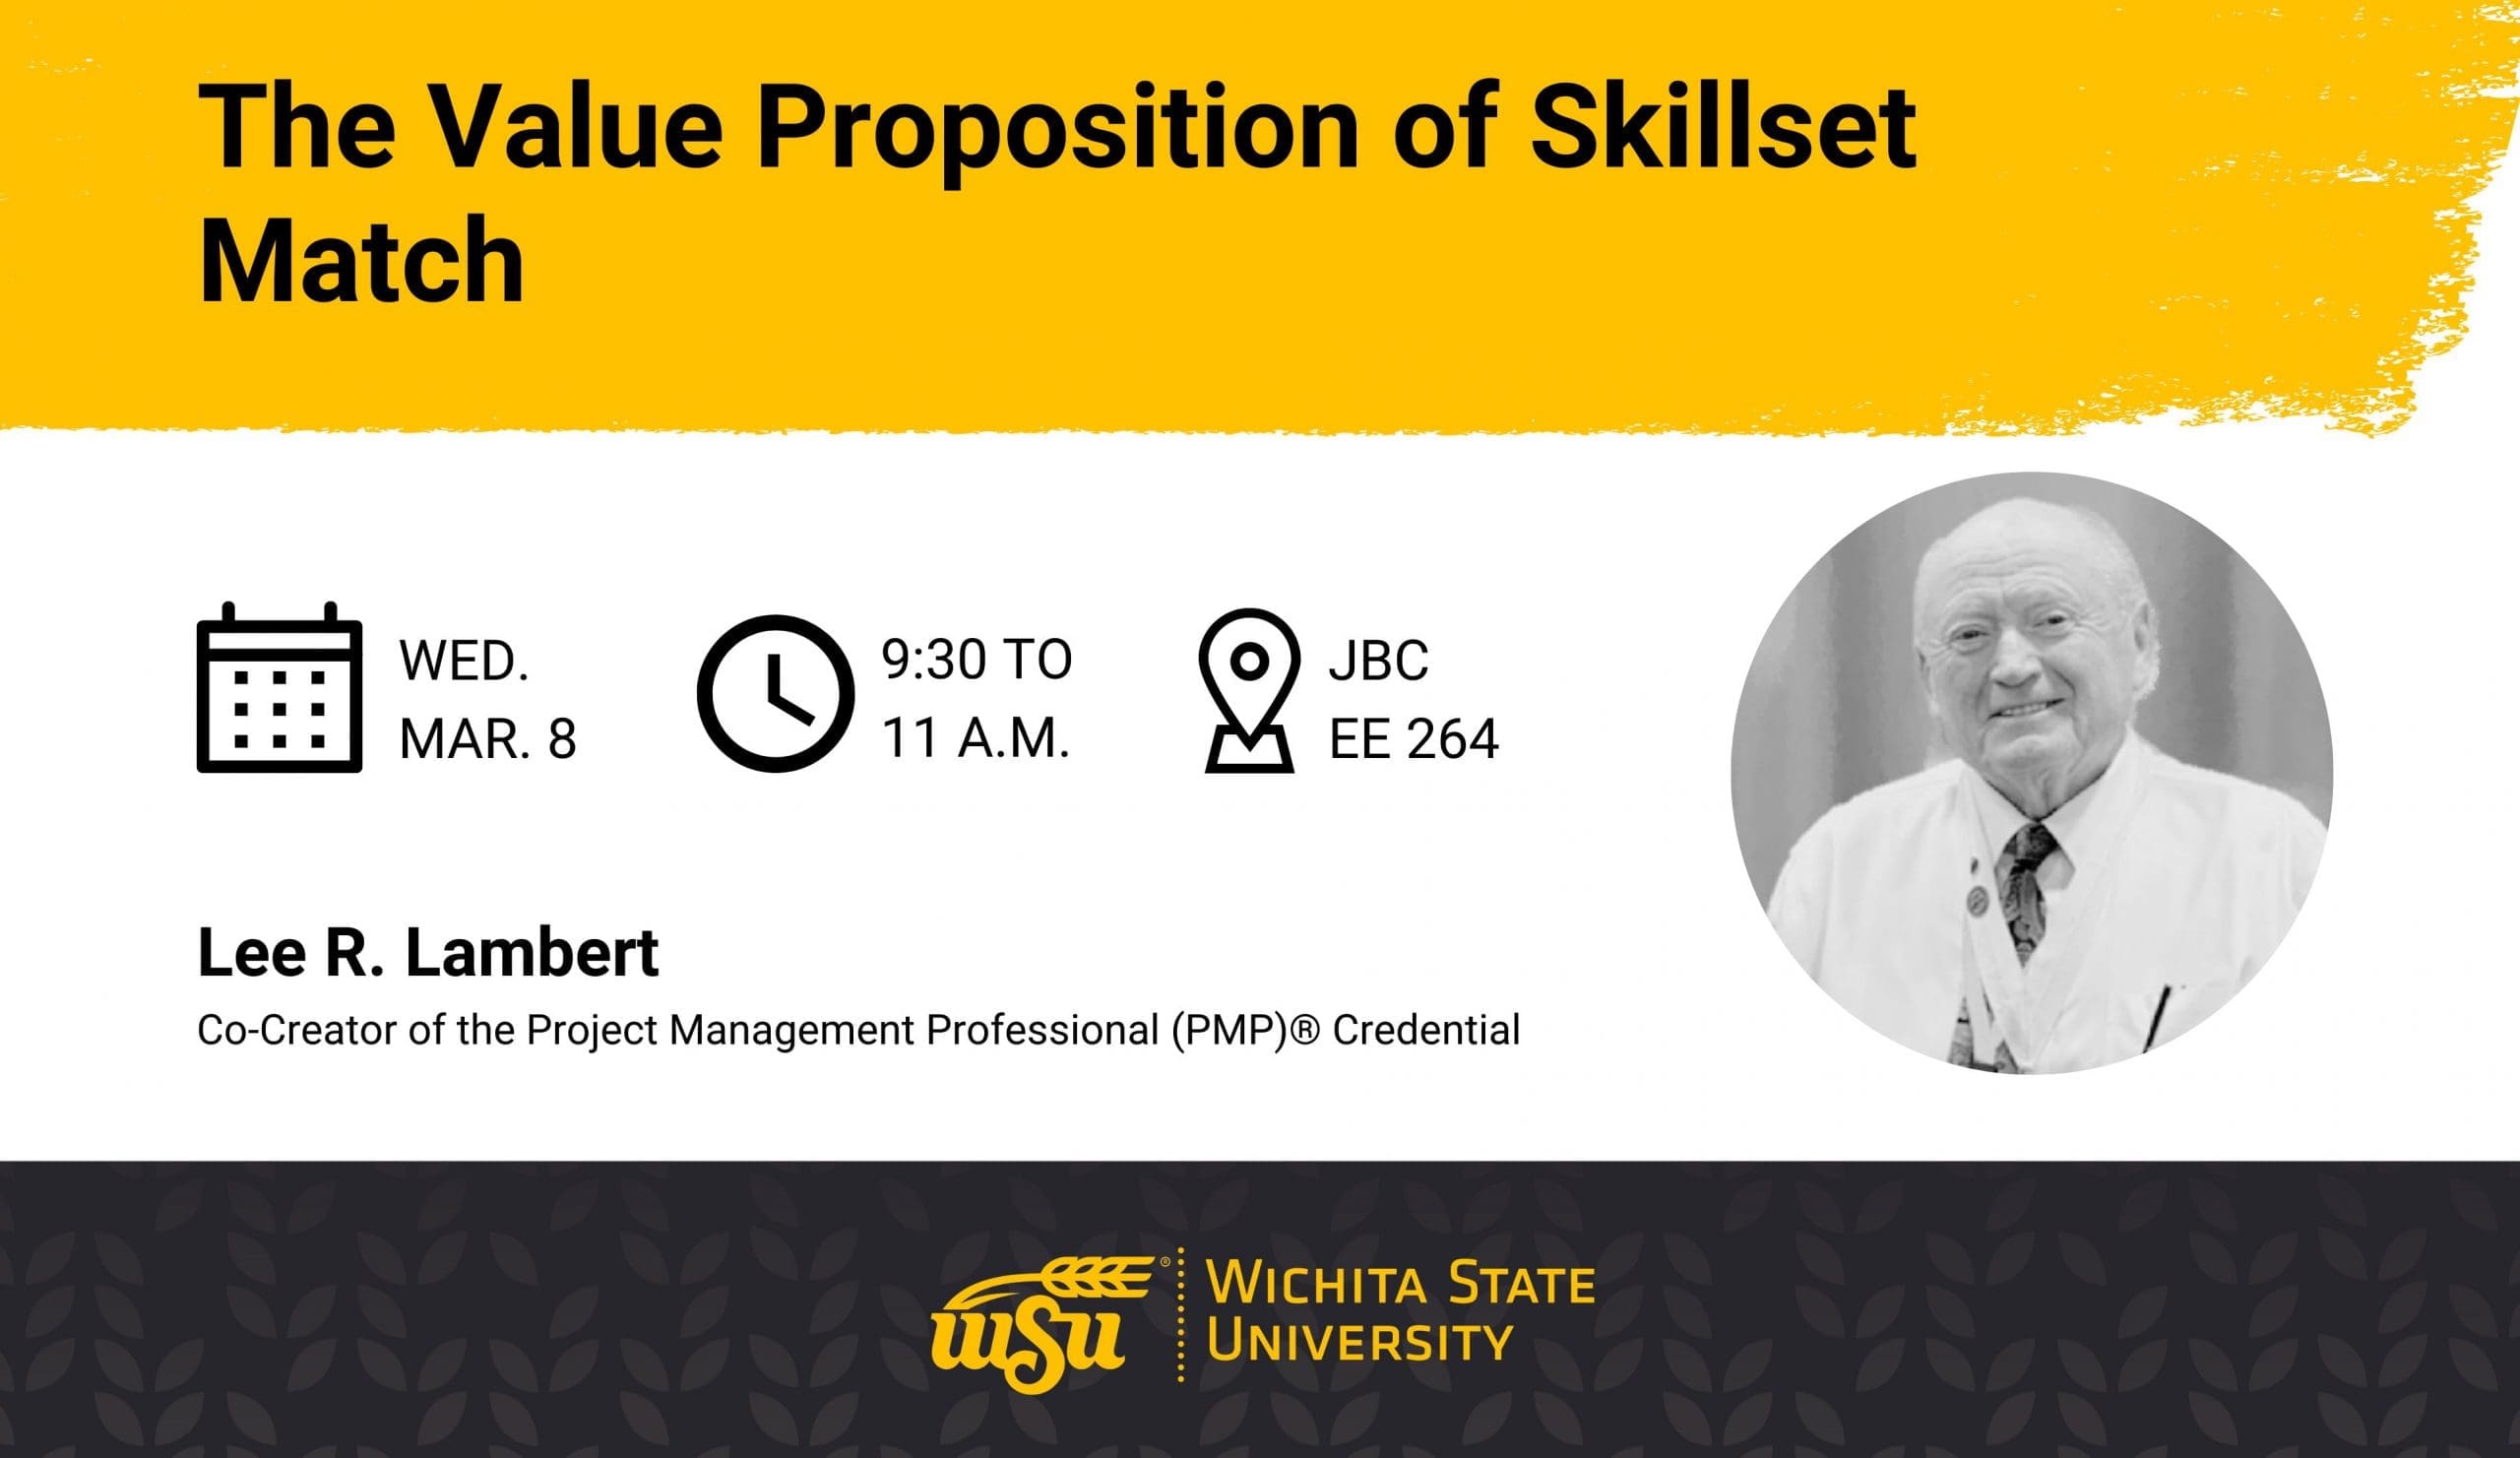 Graphic with a photo of Lee R. Lambert and the text "The Value Proposition of Skillset Match | Wed., Mar. 8 | 9:30 to 11 a.m. | JBC, EE 264 | Lee R. Lambert, Co-Creator of the Project Management Professional (PMP) Credential."